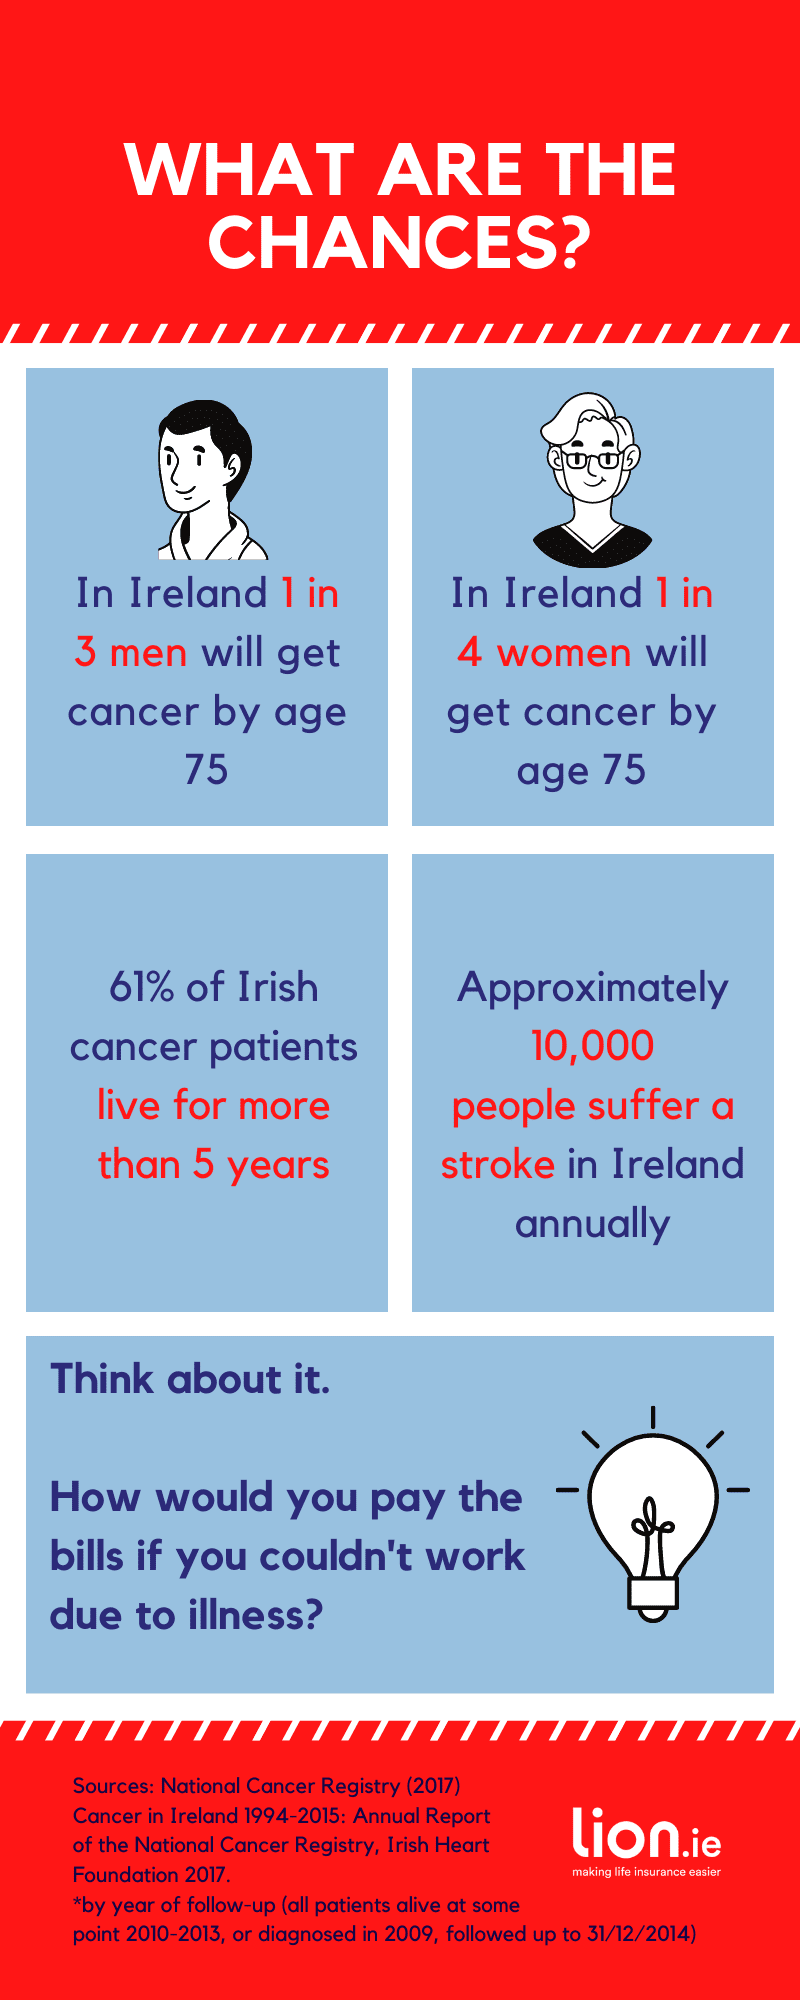 Chances of a Serious Illness Cover in Ireland (3)